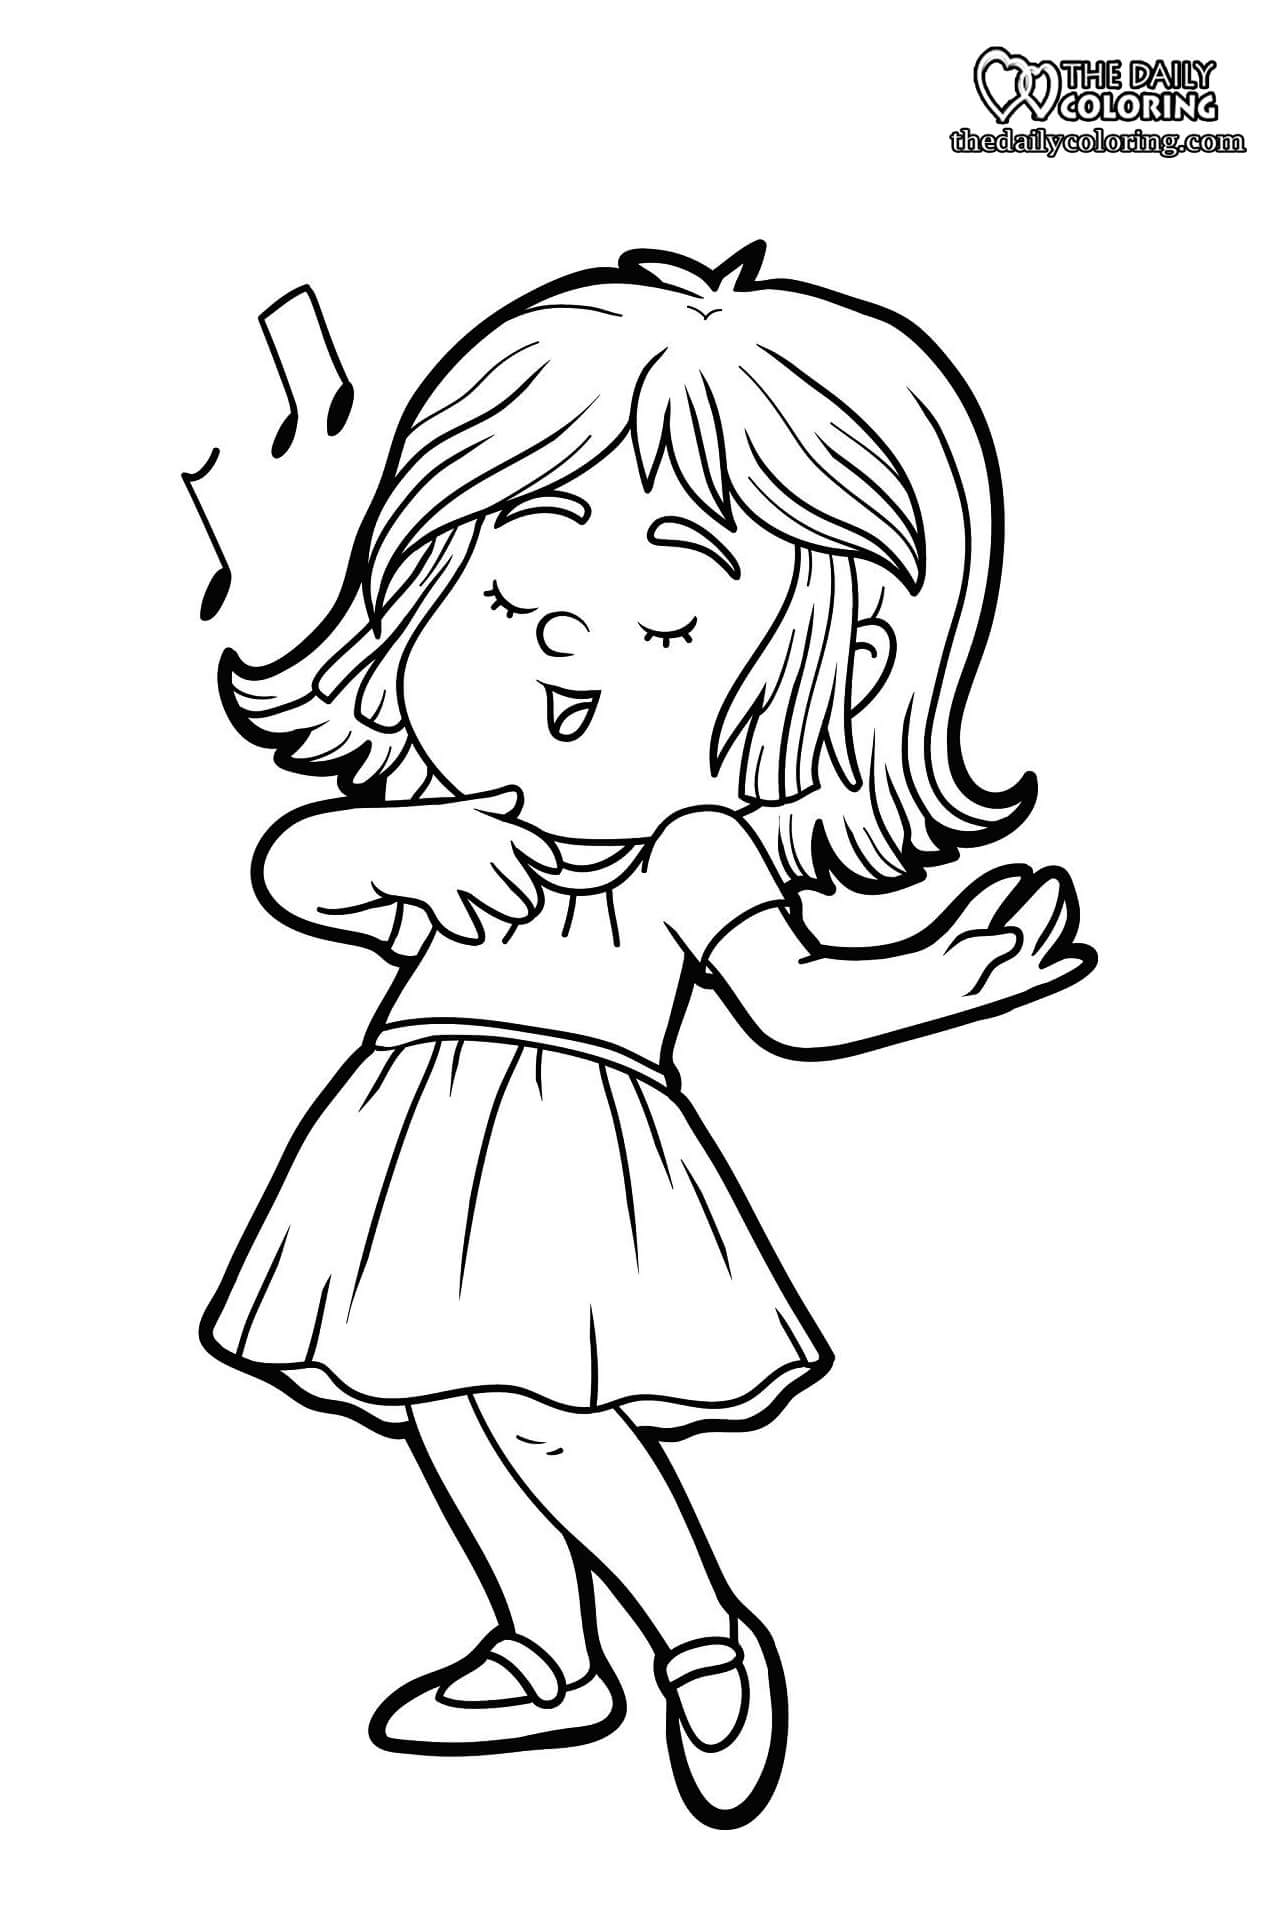 singer-coloring-page